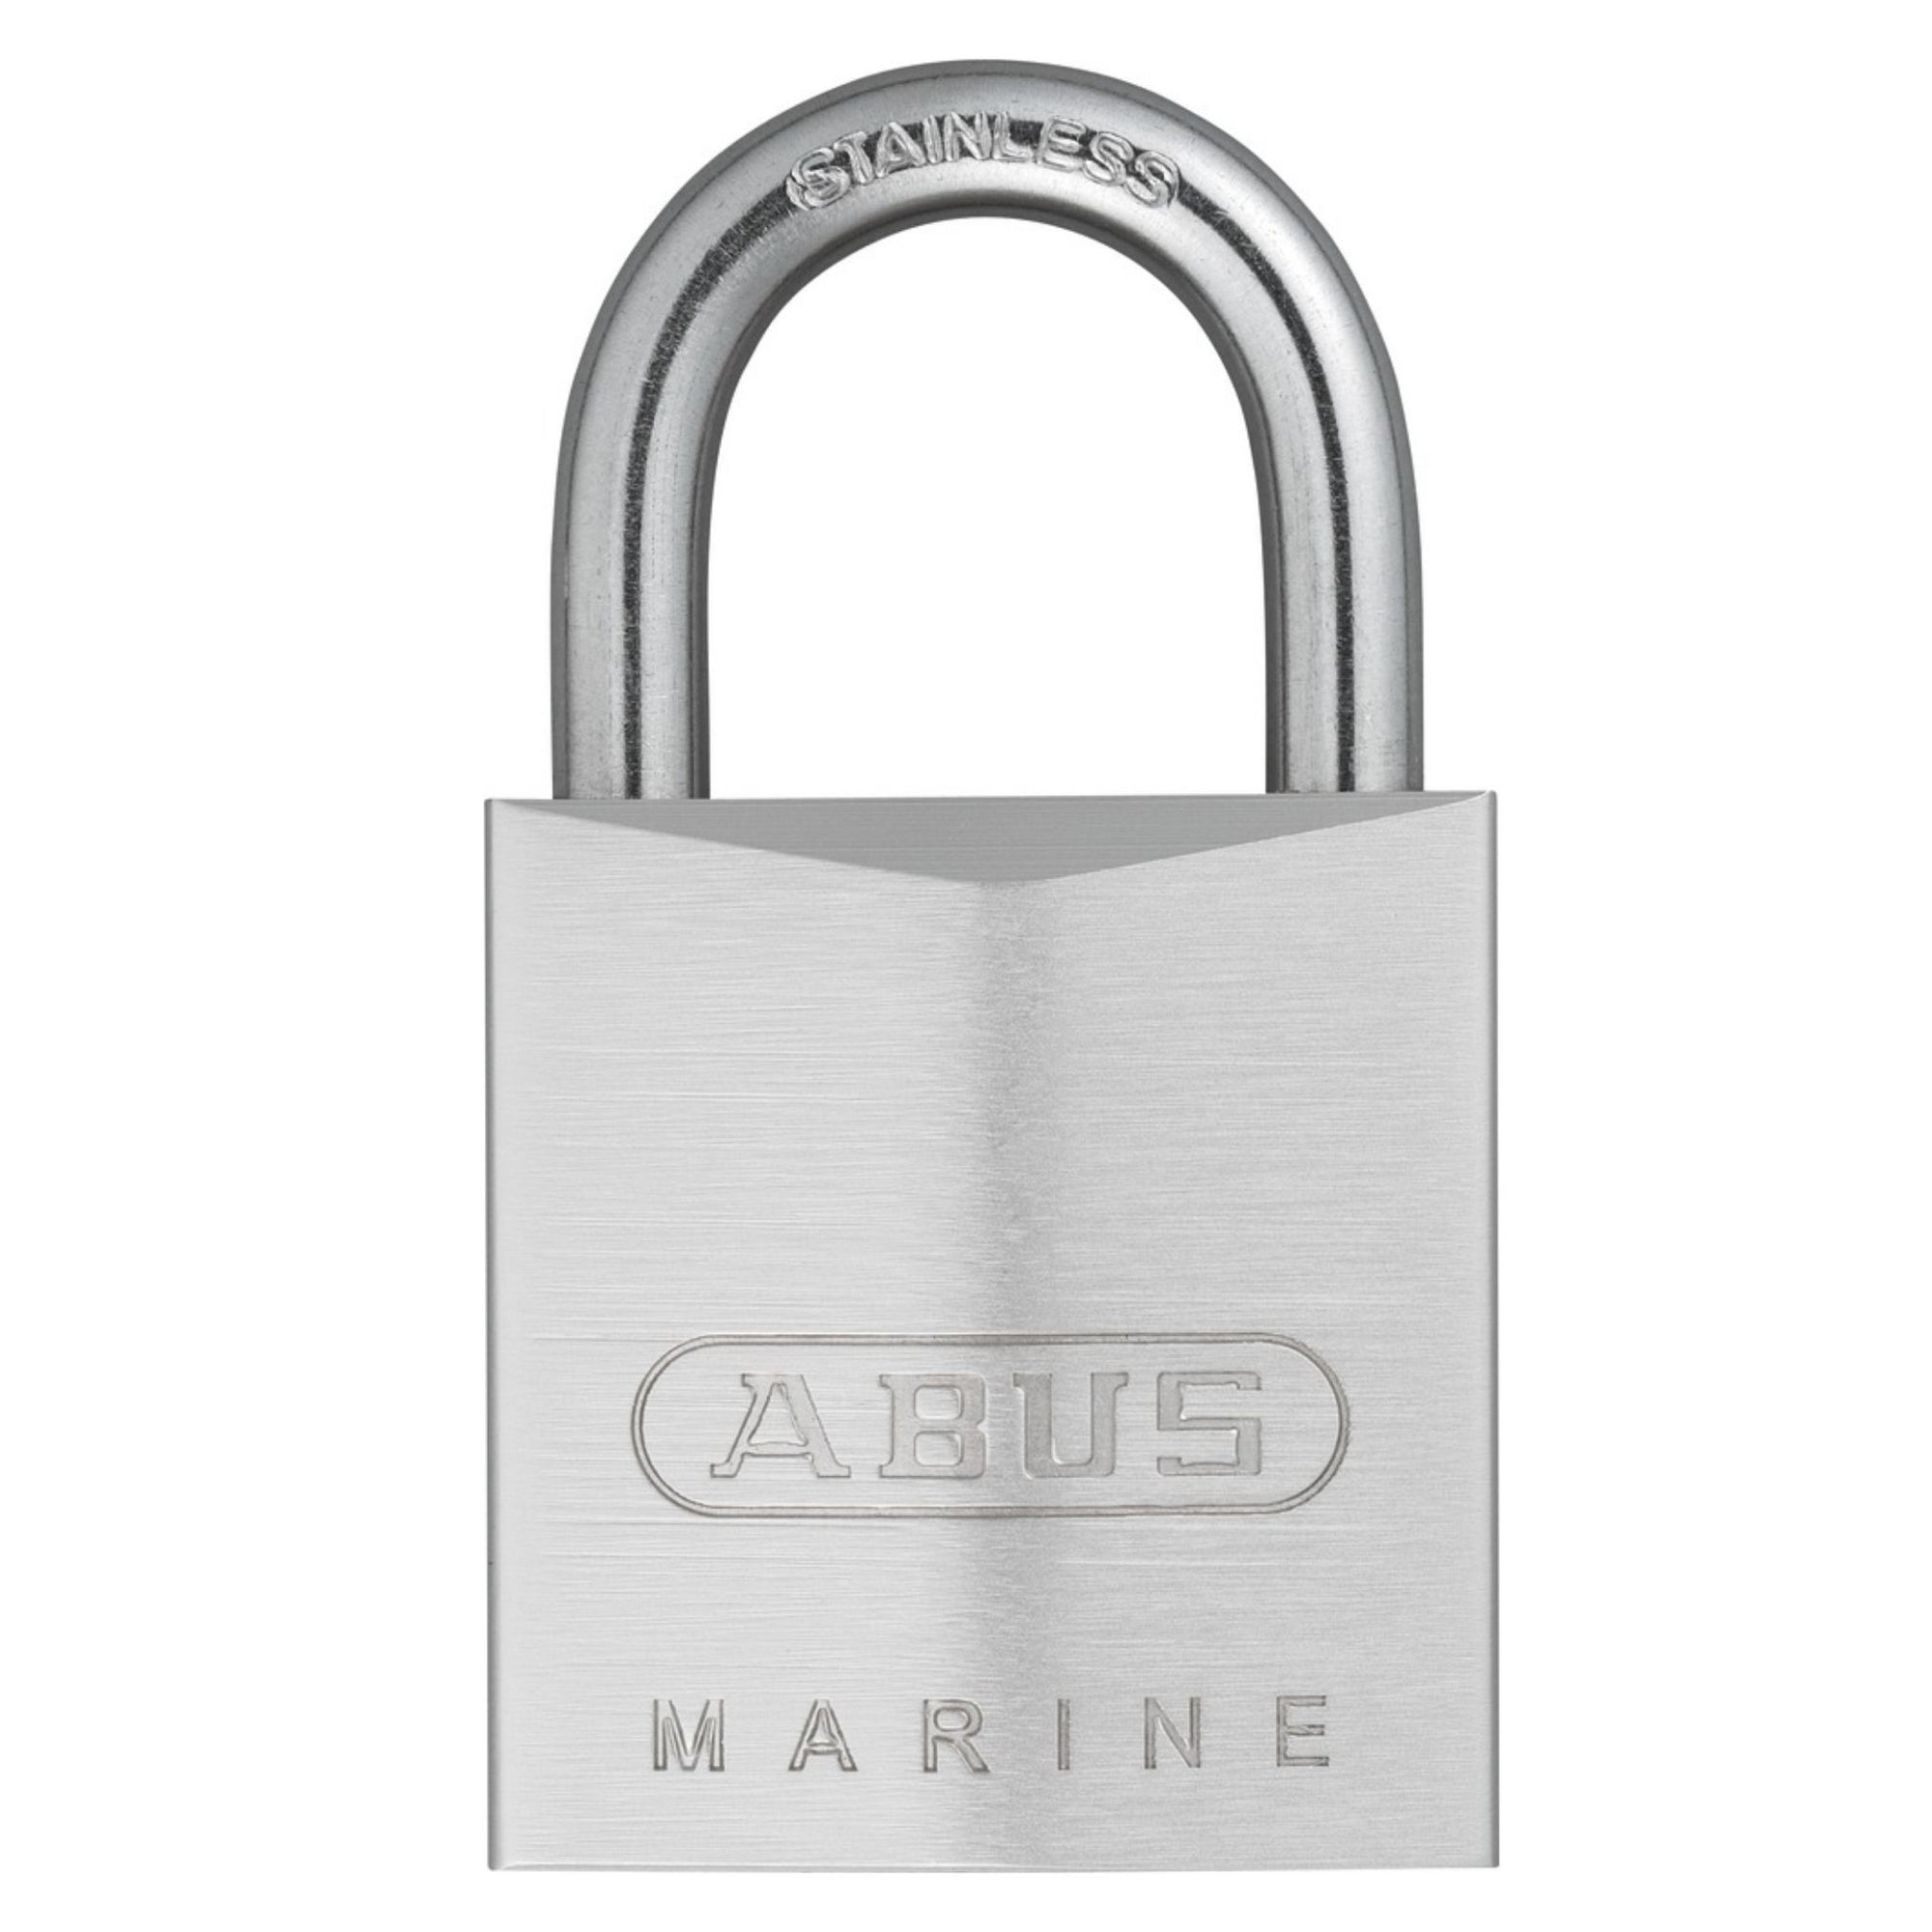 Abus 75IB/30 KD Weatherproof Brass Padlock with Stainless Steel Shackle - The Lock Source